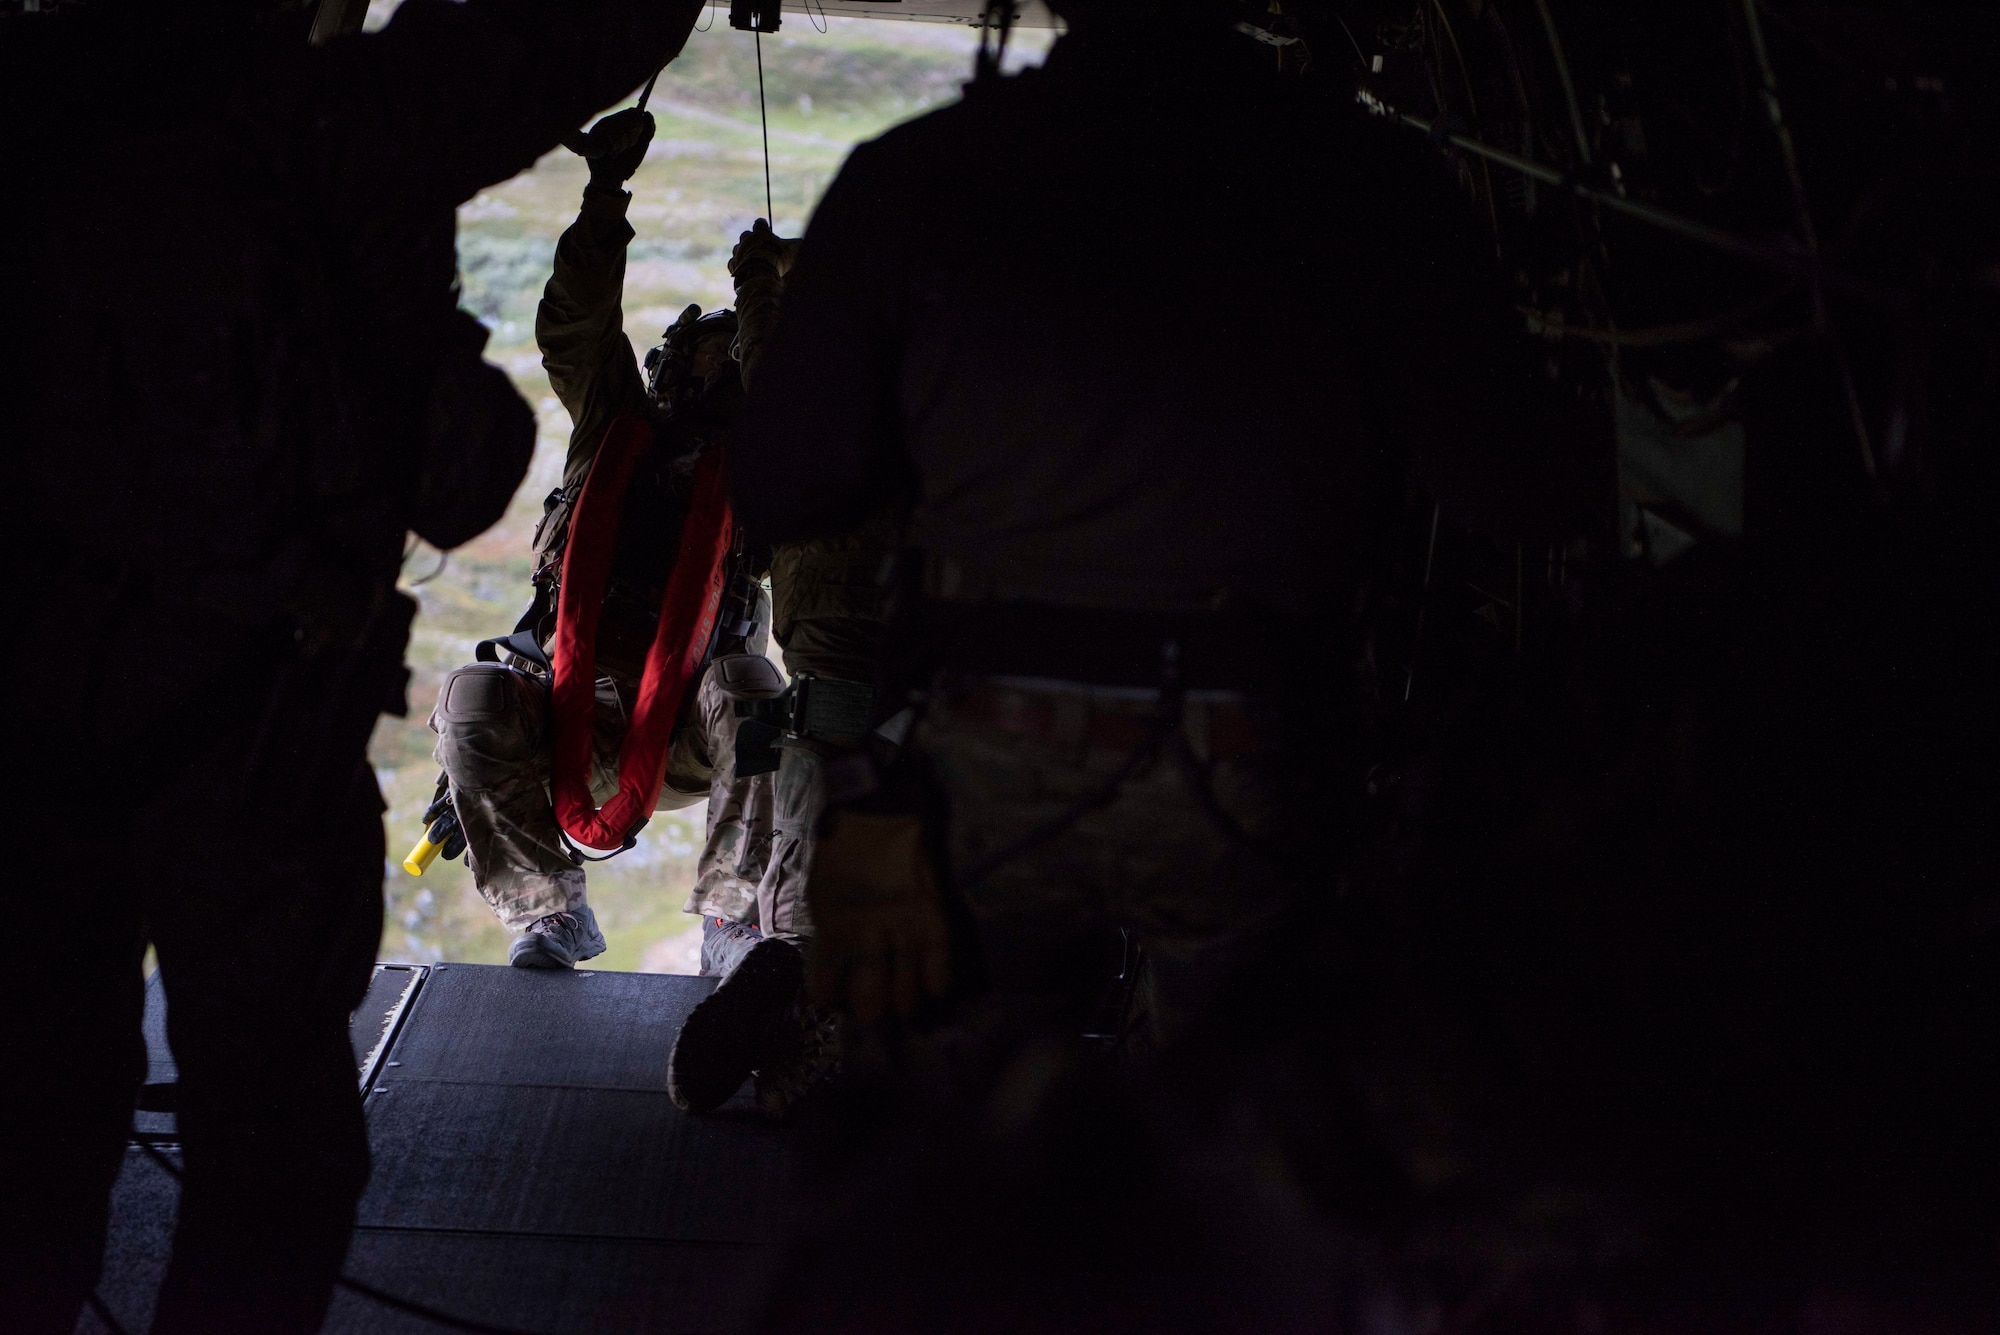 A 321st Special Tactics Squadron Airman descends from a CV-22B Osprey, based out of RAF Milden-hall, U.K., to rescue a downed aircraft crew member during a training mission near Bodø, Norway, Au-gust 27, 2020. Integration with the Norwegian Air Force allowed the 352d Special Operations Wing to enhance and strengthen bonds with our partner nation and further secure the strategic high-north re-gion. The exercise provided training for 352d Special Operations Wing members on capabilities such as personnel recovery, forward area refueling point, aerial refueling, maritime craft delivery system, and fast rope training. (U.S. Air Force photo by Staff Sgt. Michael Washburn)